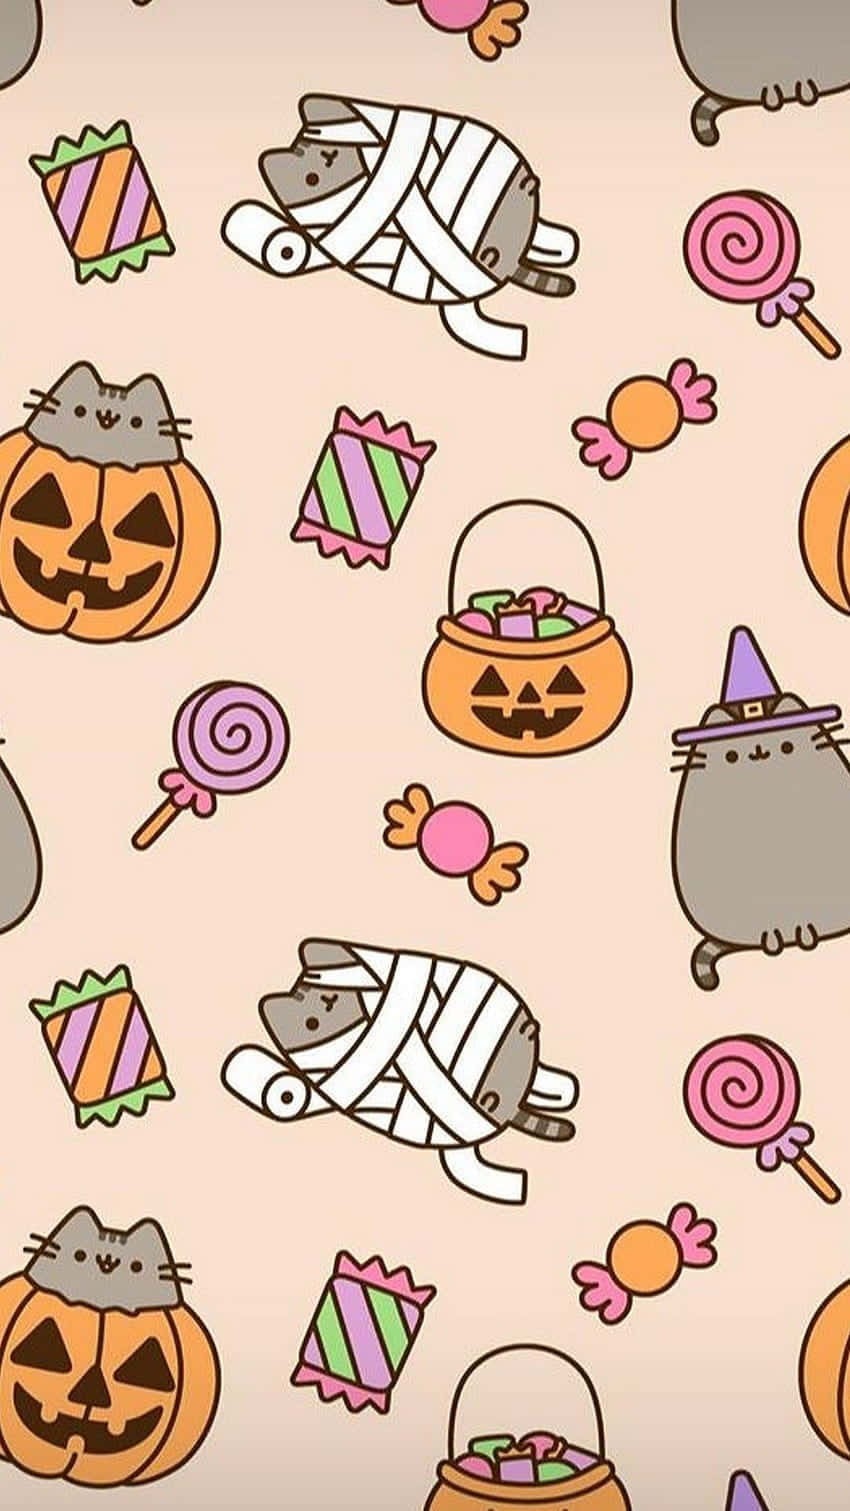 Aesthetic Halloween Background Cute Cat Candies And Pumpkin Baskets Background